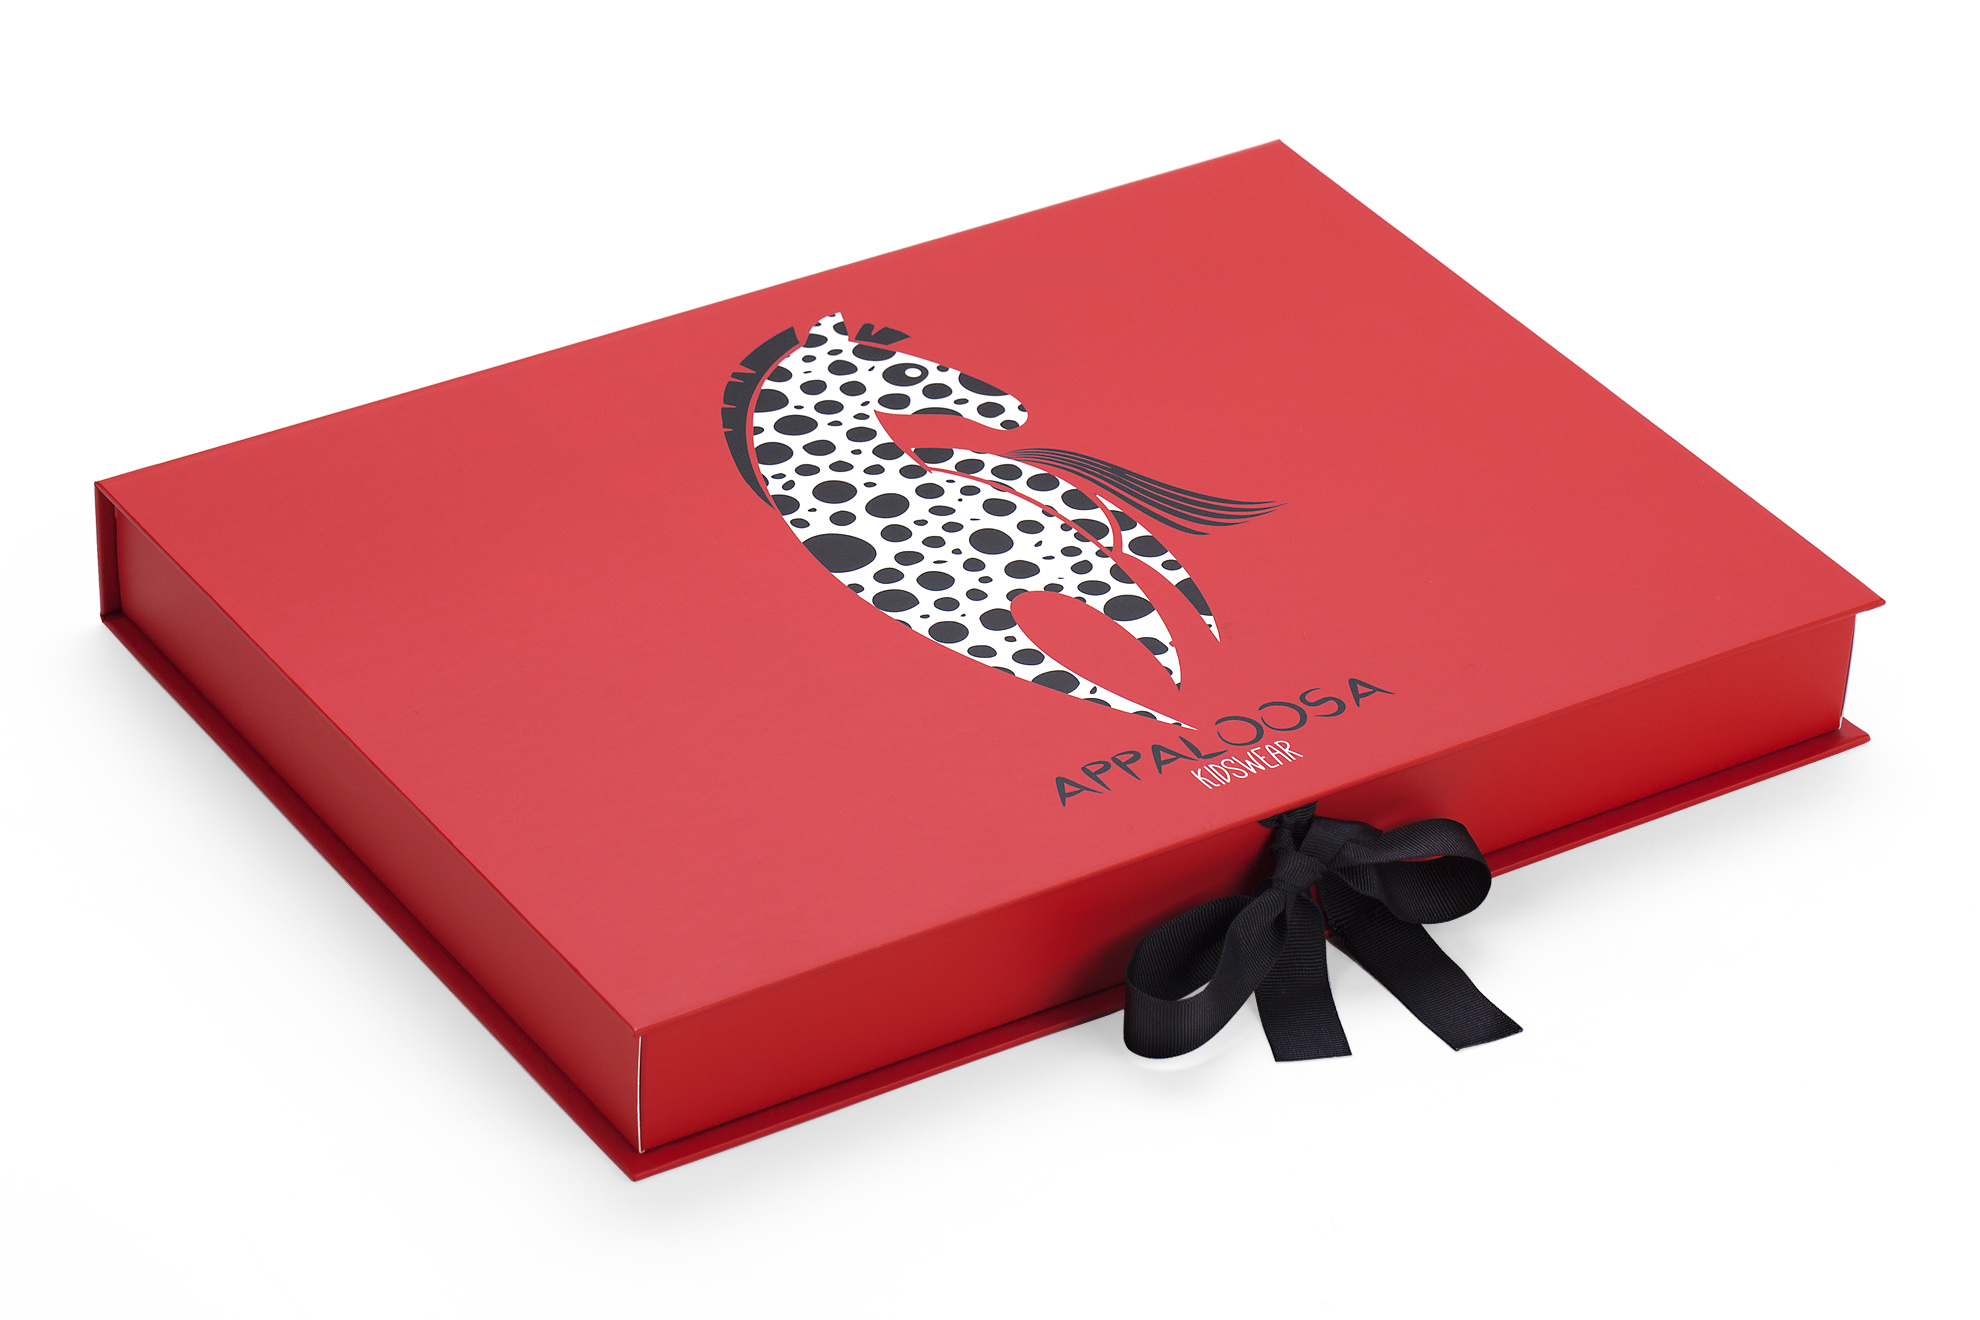 branded and laminated luxury apparel retail box with ribbons Appaloosa